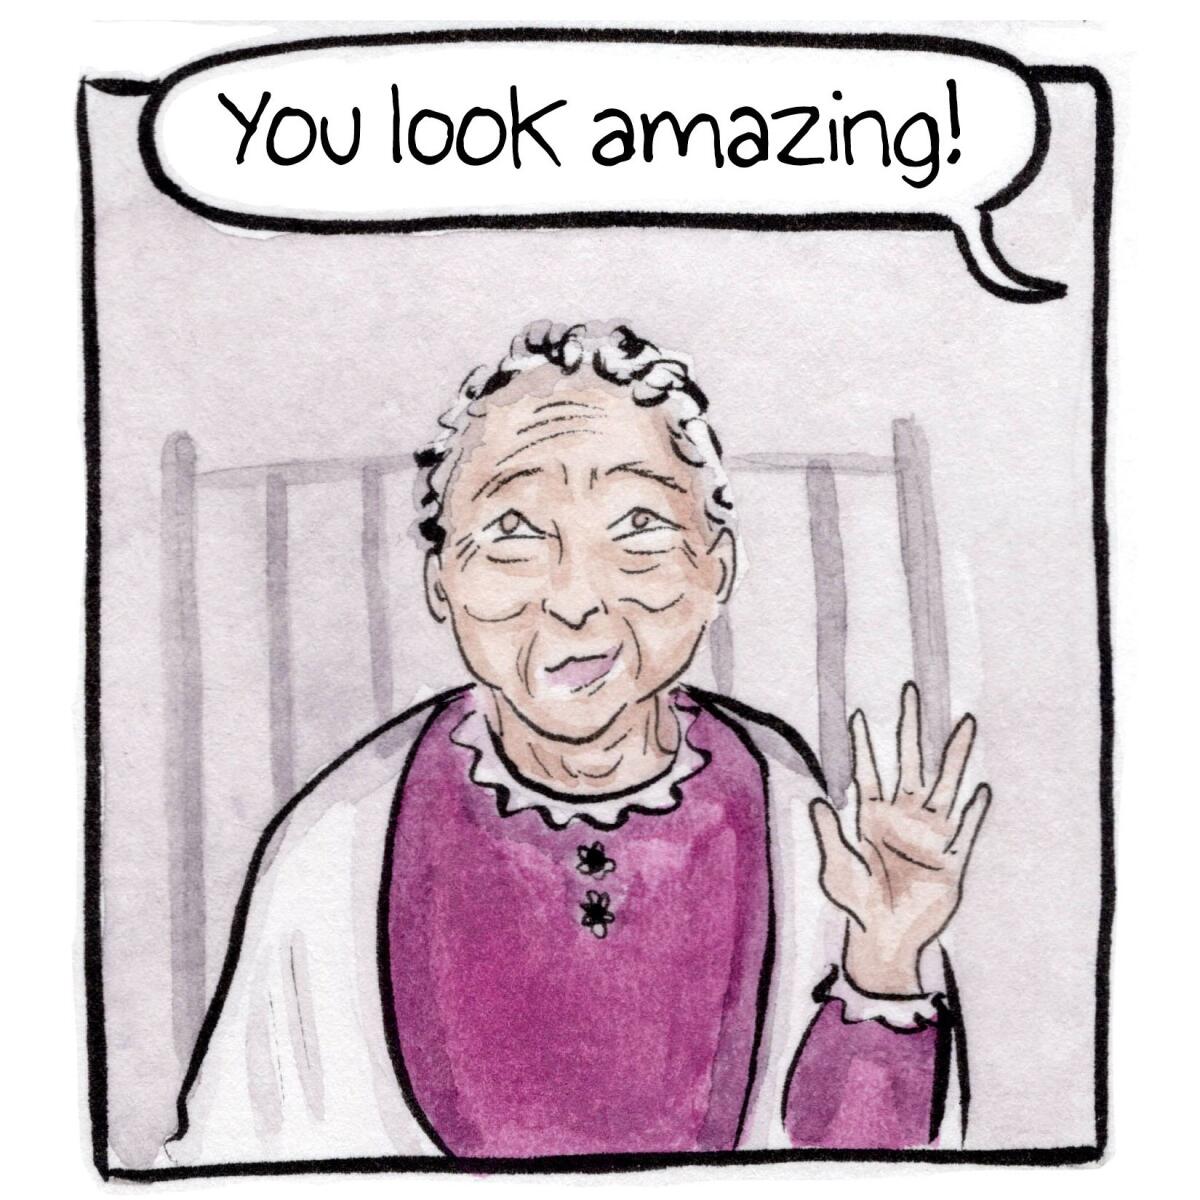 Someone says, "You look amazing!" to an elderly woman in a pink nightgown, who waves while sitting on the bed.